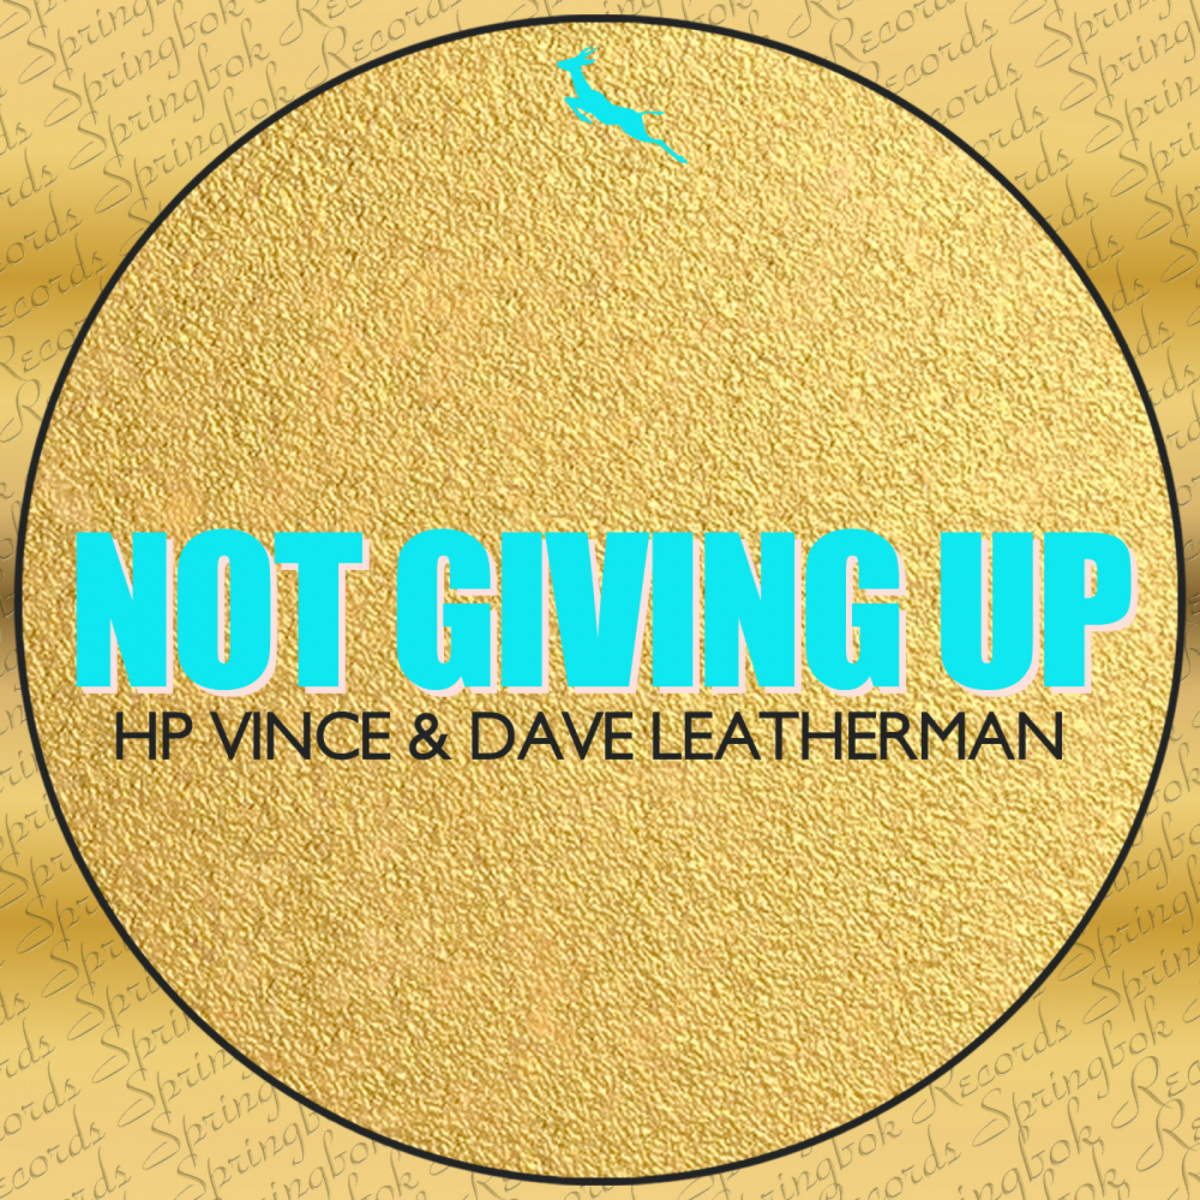 HP Vince & Dave Leatherman - Not Giving Up (Nu Disco Mix) / Springbok Records